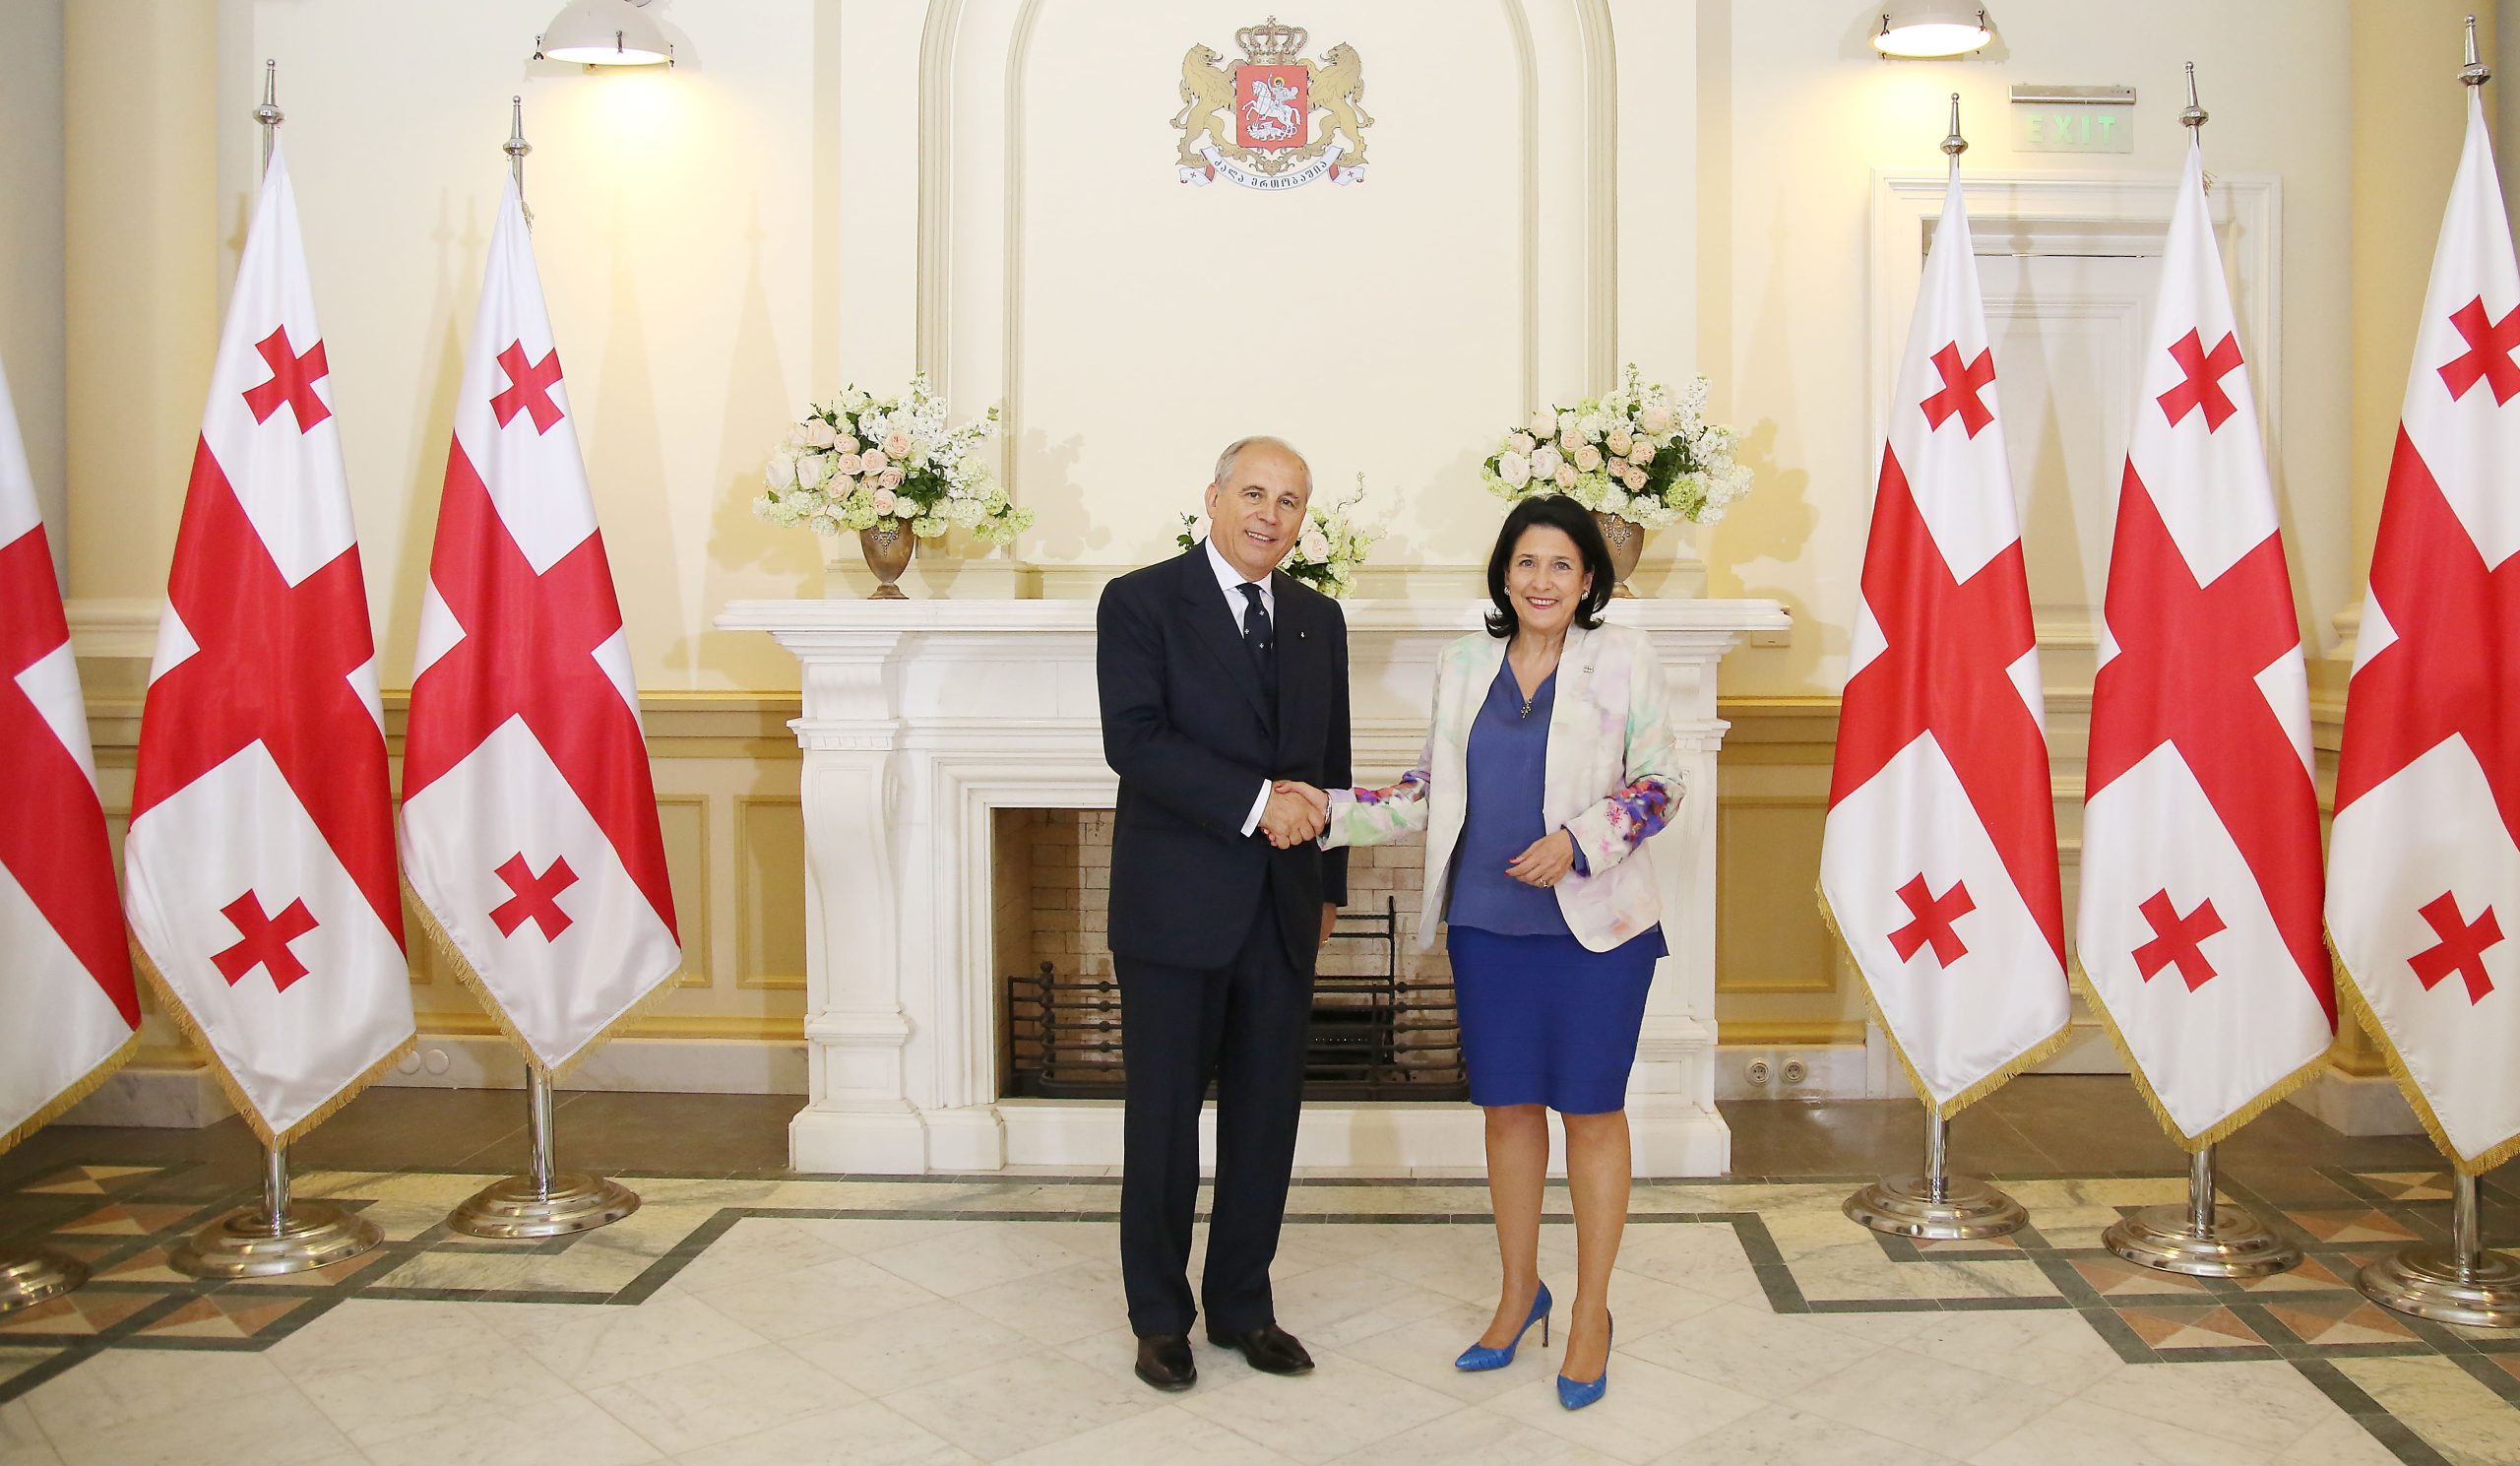 The new Ambassador of the Order of Malta to Georgia presents his letters of credence